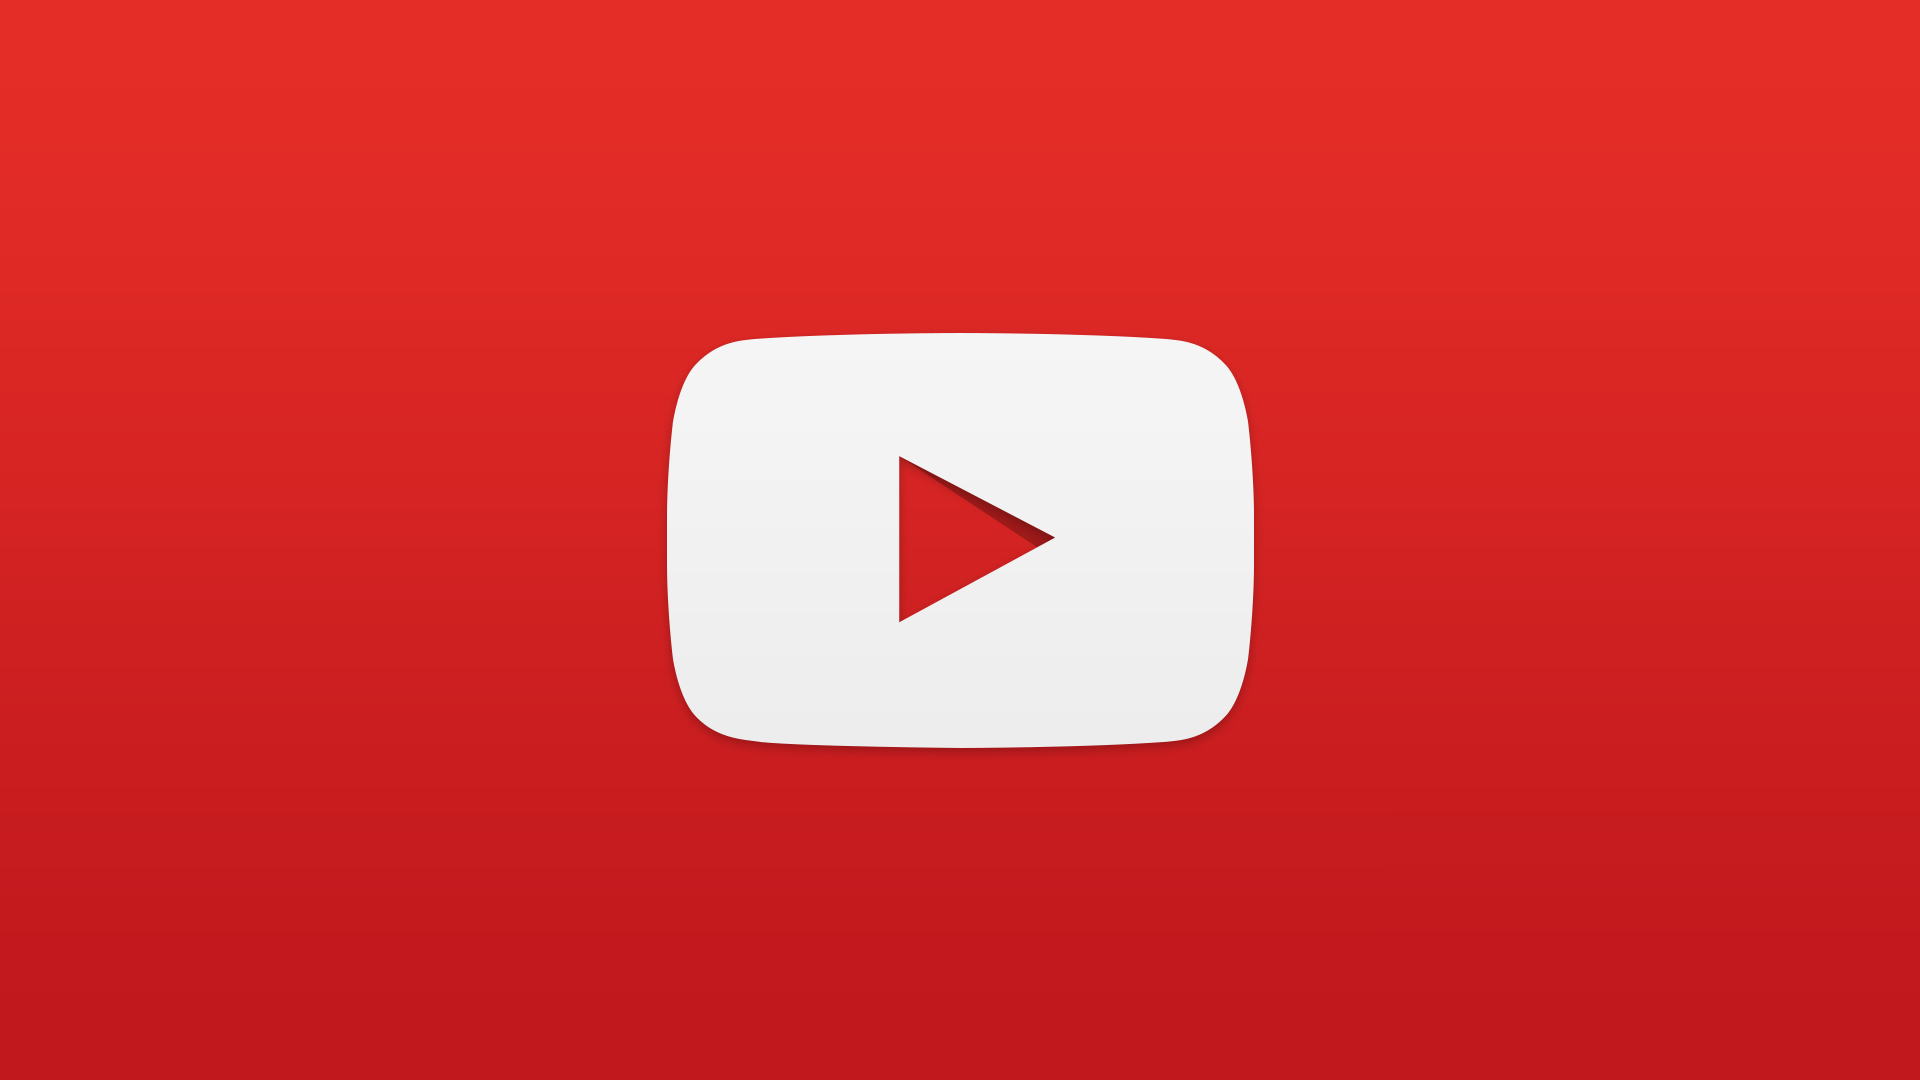 YouTube Play Button Wallpaper 62901 1920x1080px